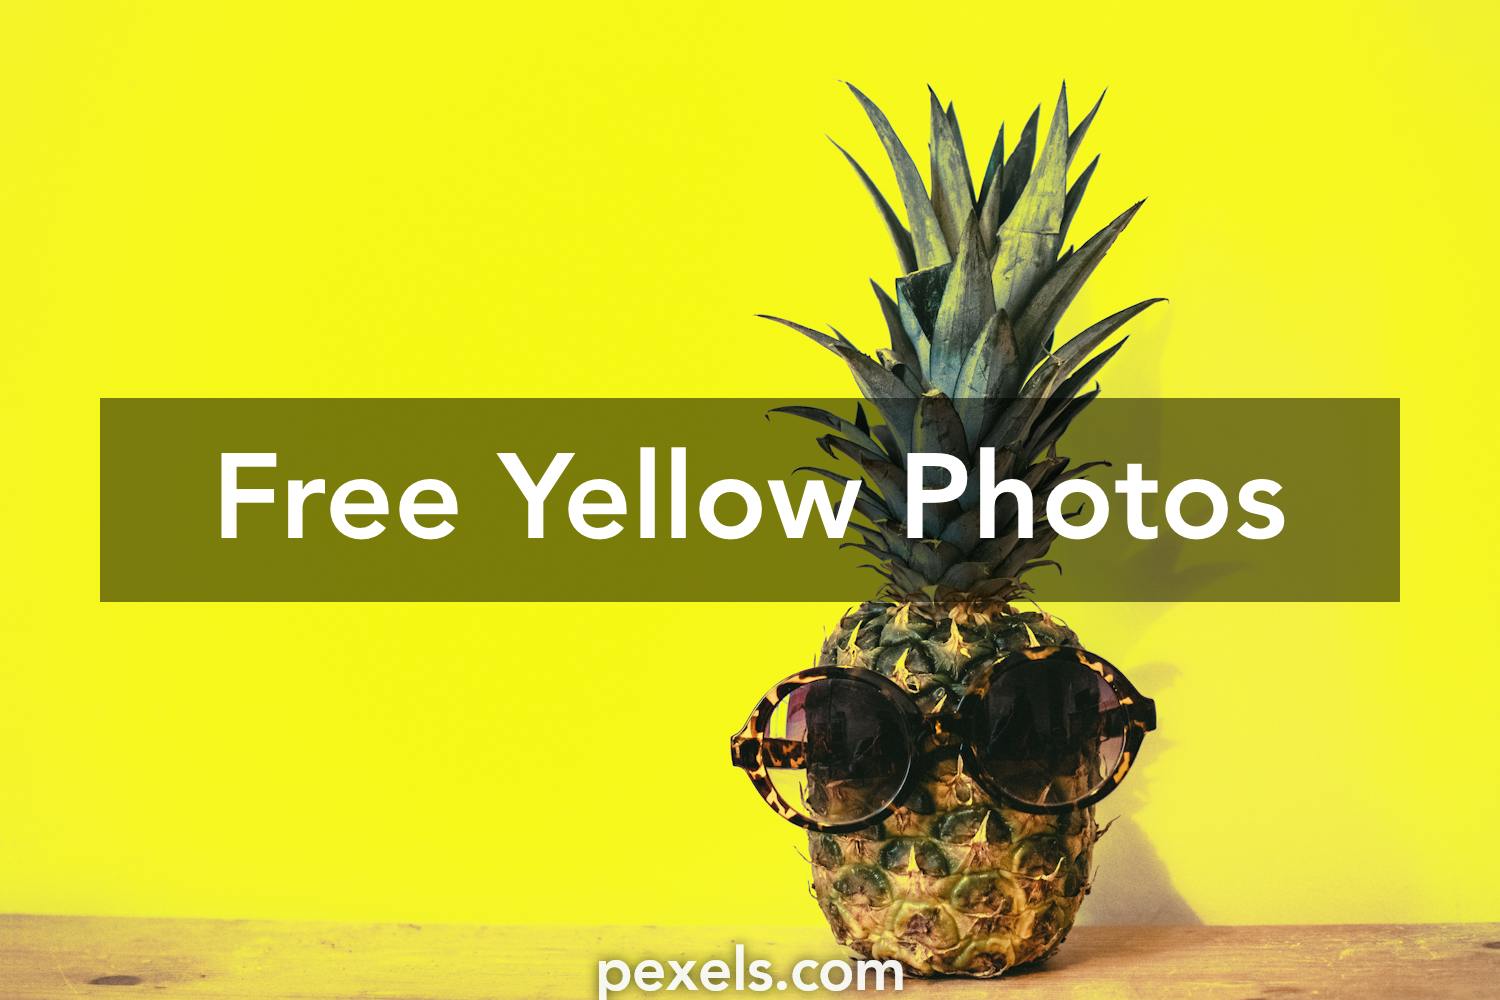 Download Free stock images with the color Yellow (#ffff00)